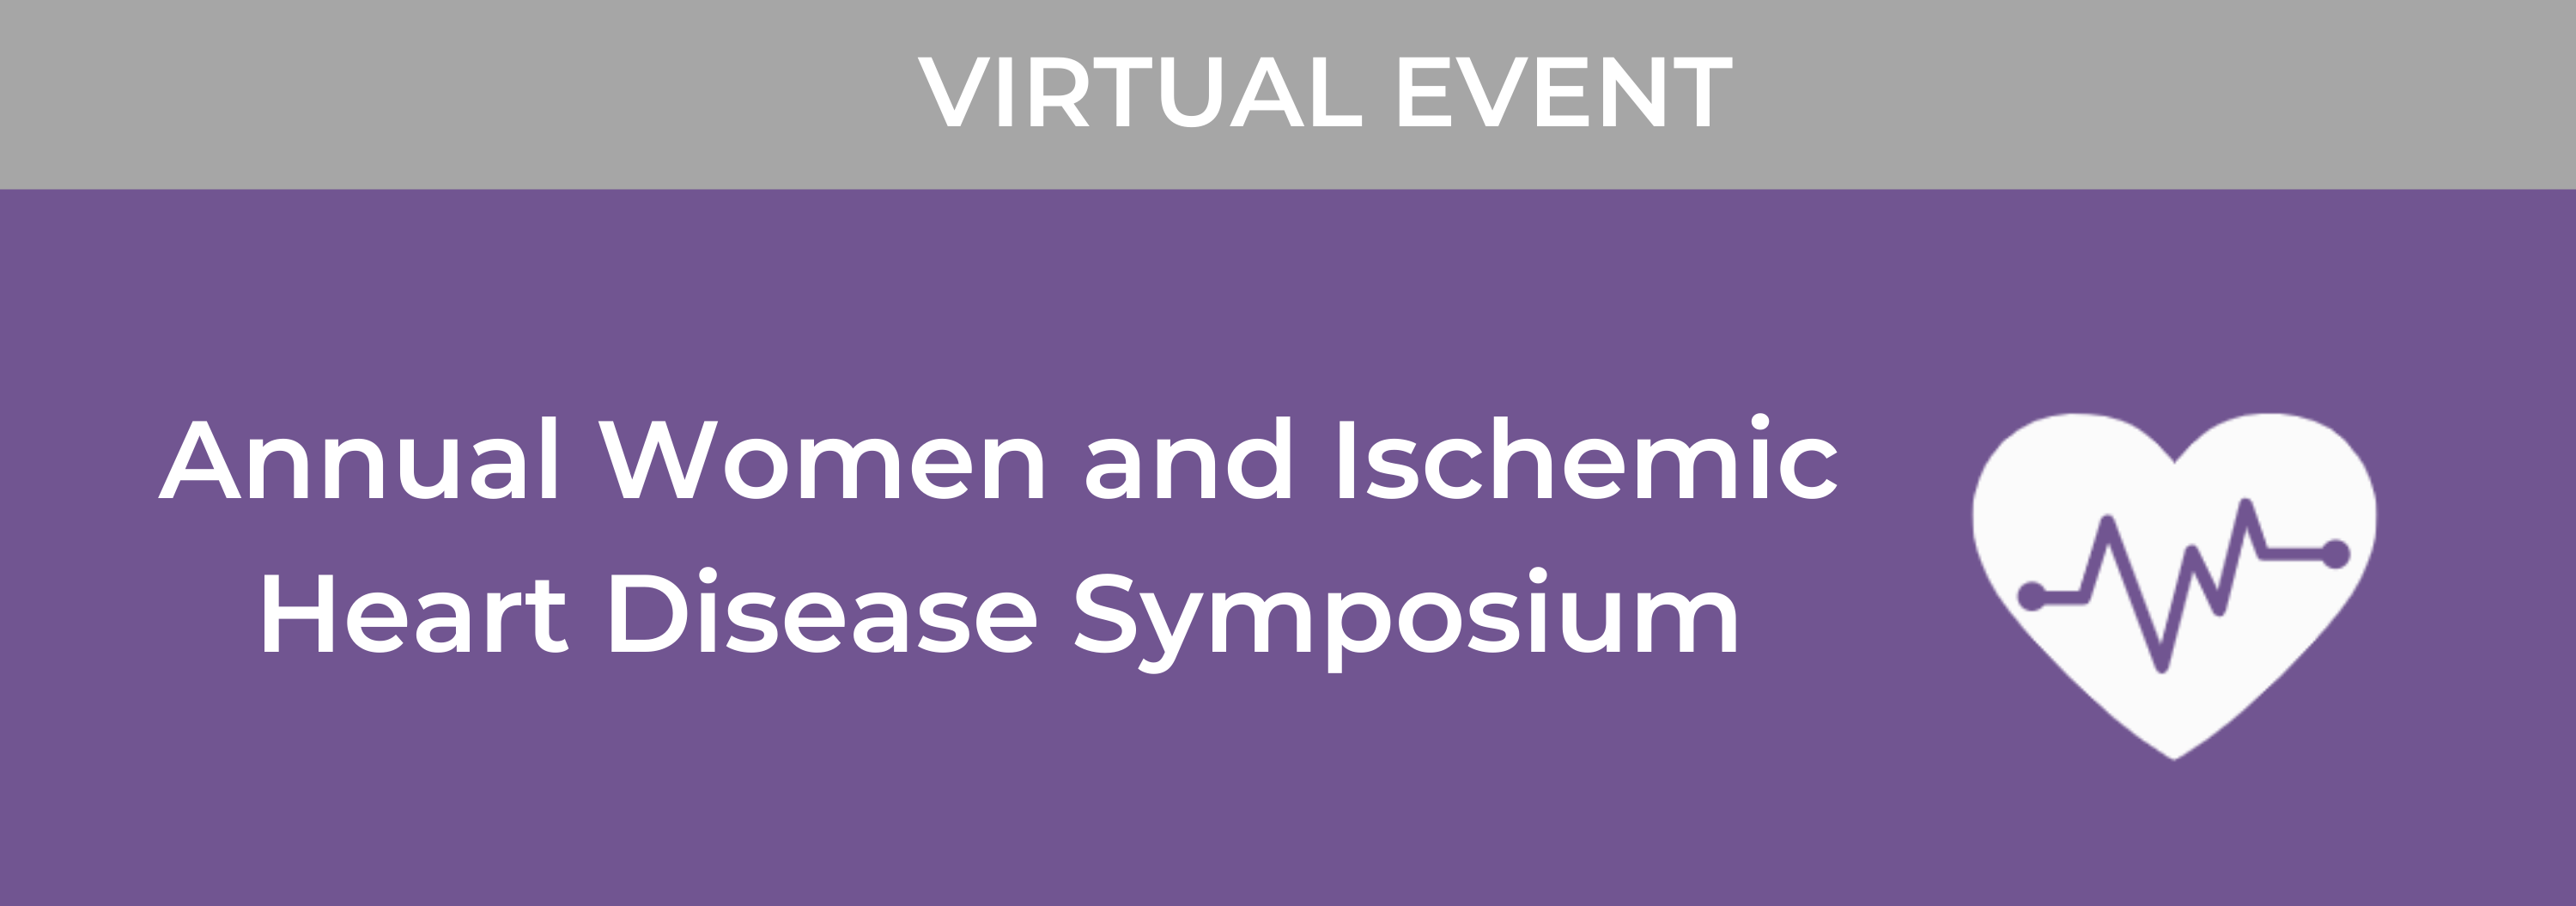 14th Annual Women and Ischemic Heart Disease Symposium Banner